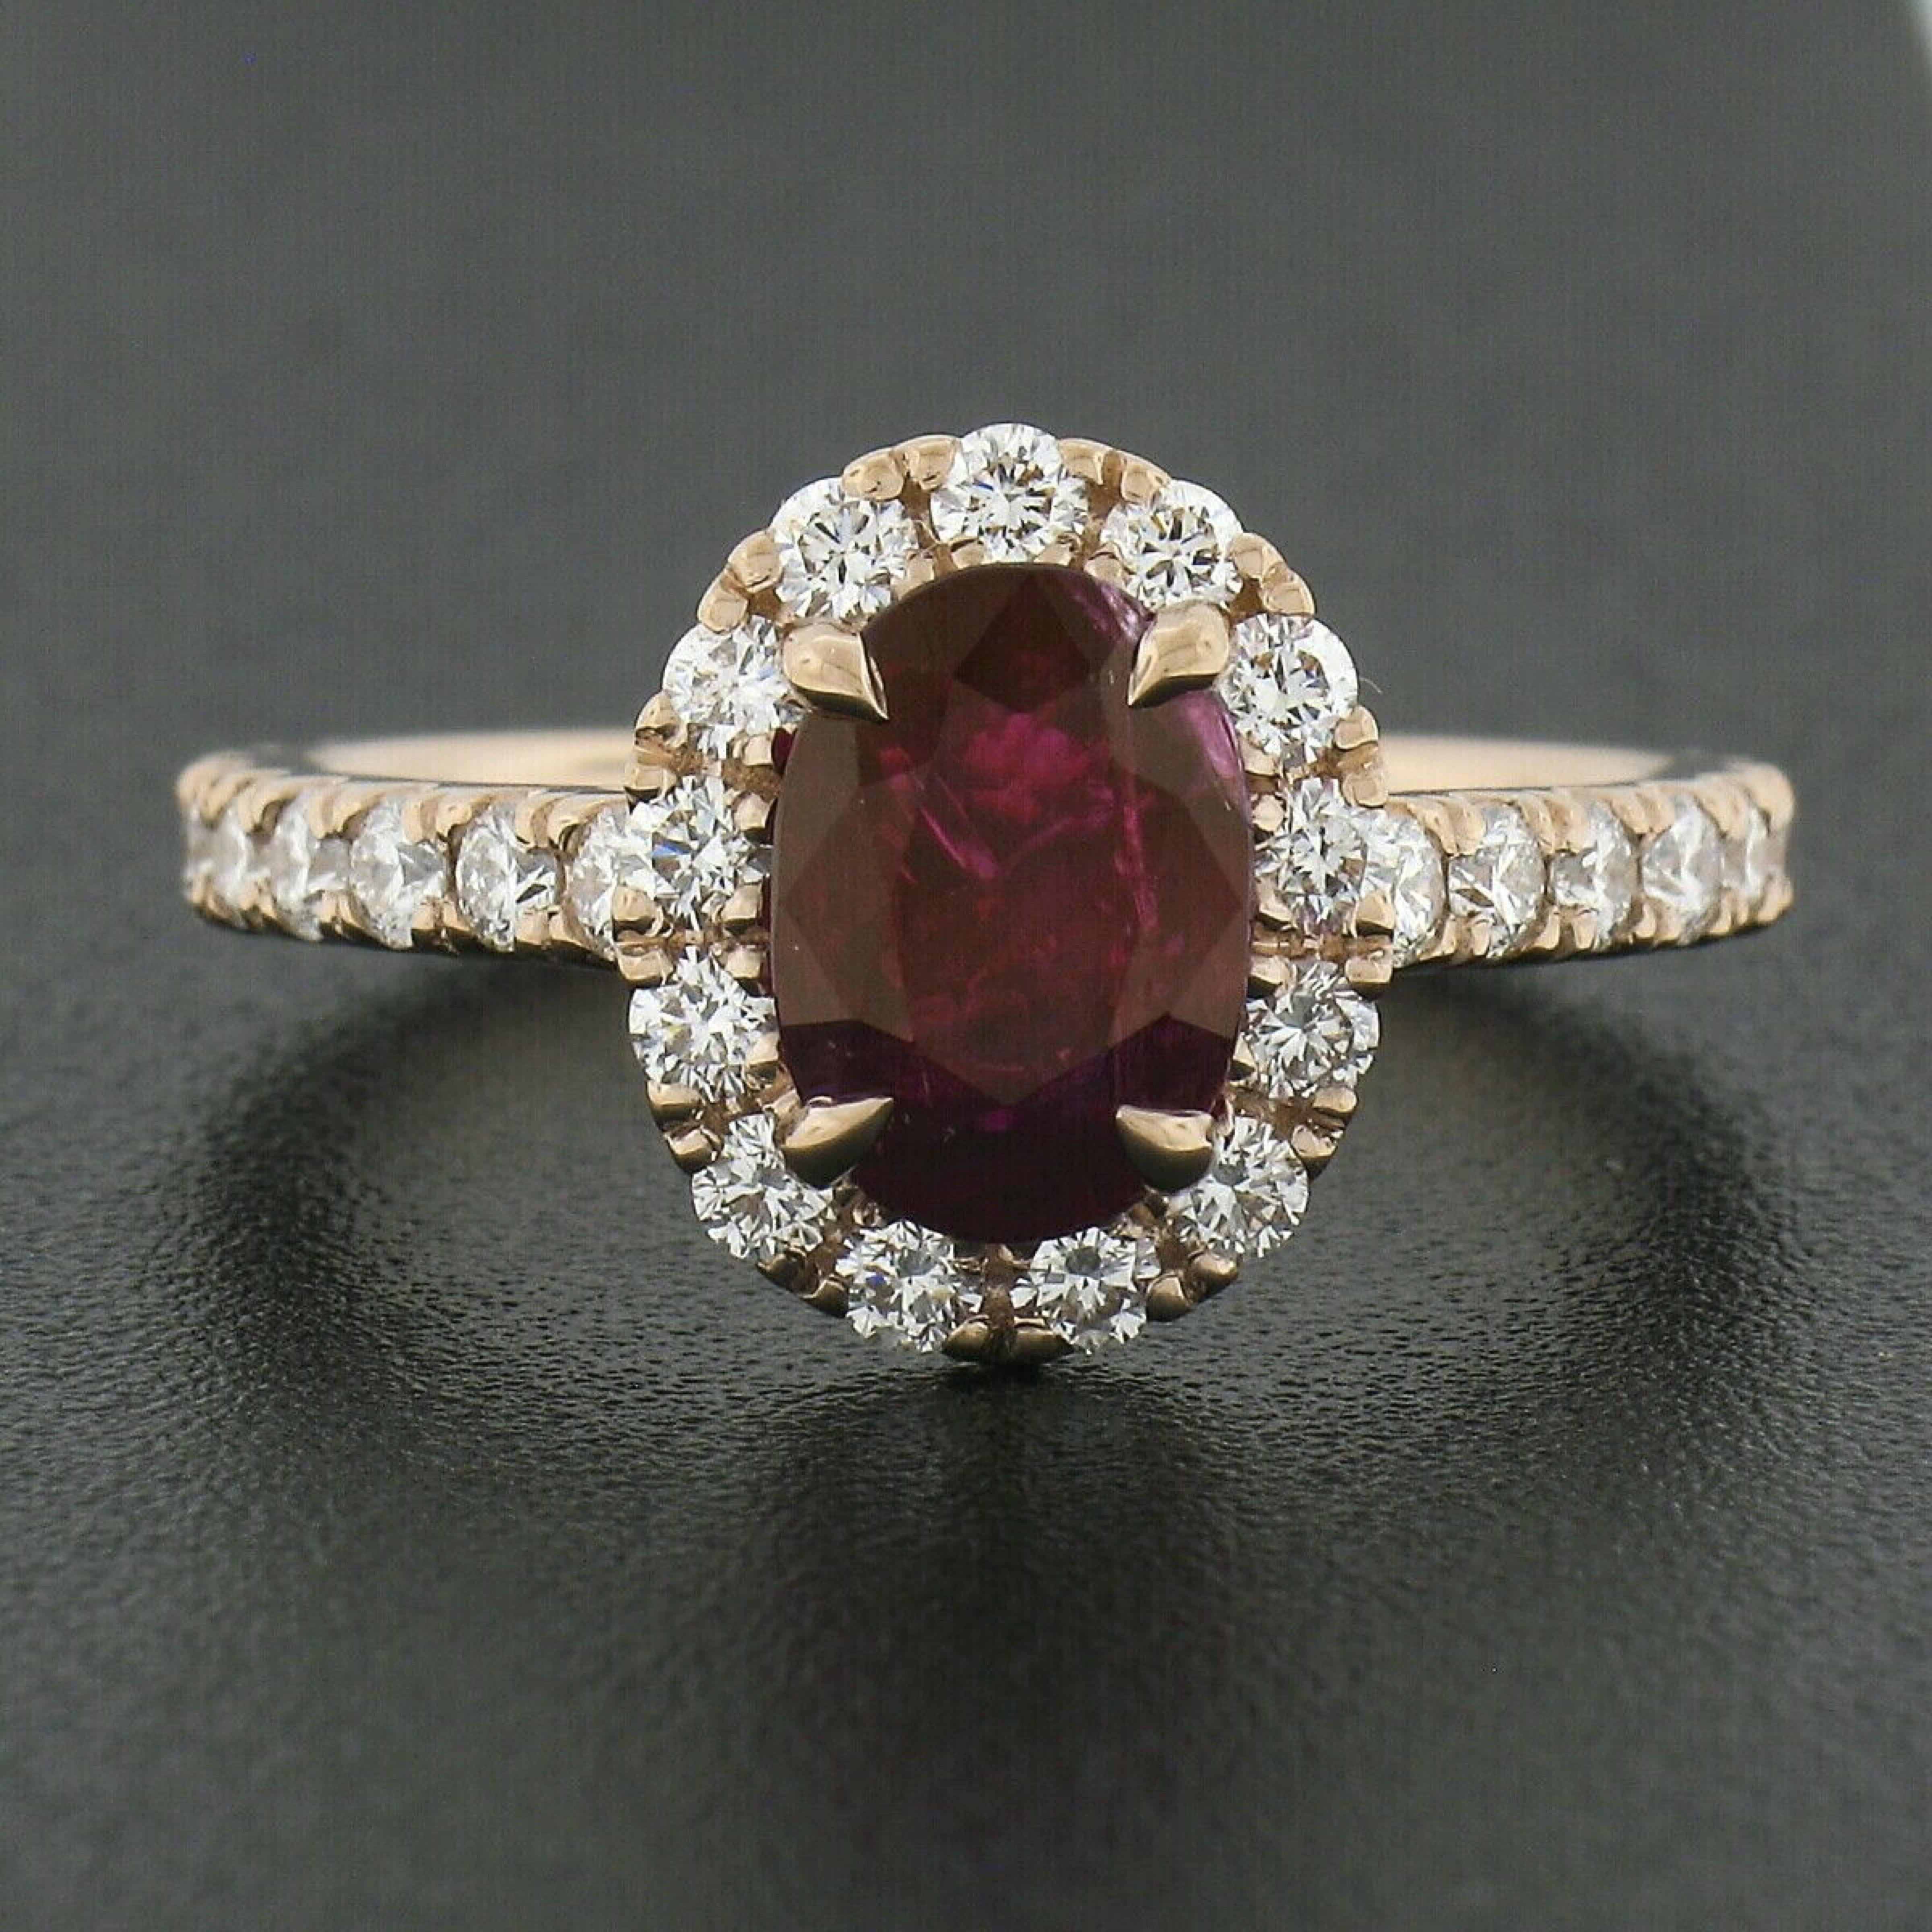 This elegant brand new ruby and diamond ring is crafted in solid 14k rose gold and features a GIA certified natural ruby stone weighing exactly 2.34 carats and displaying a truly gorgeous and deep red color. The fine ruby has an oval brilliant cut